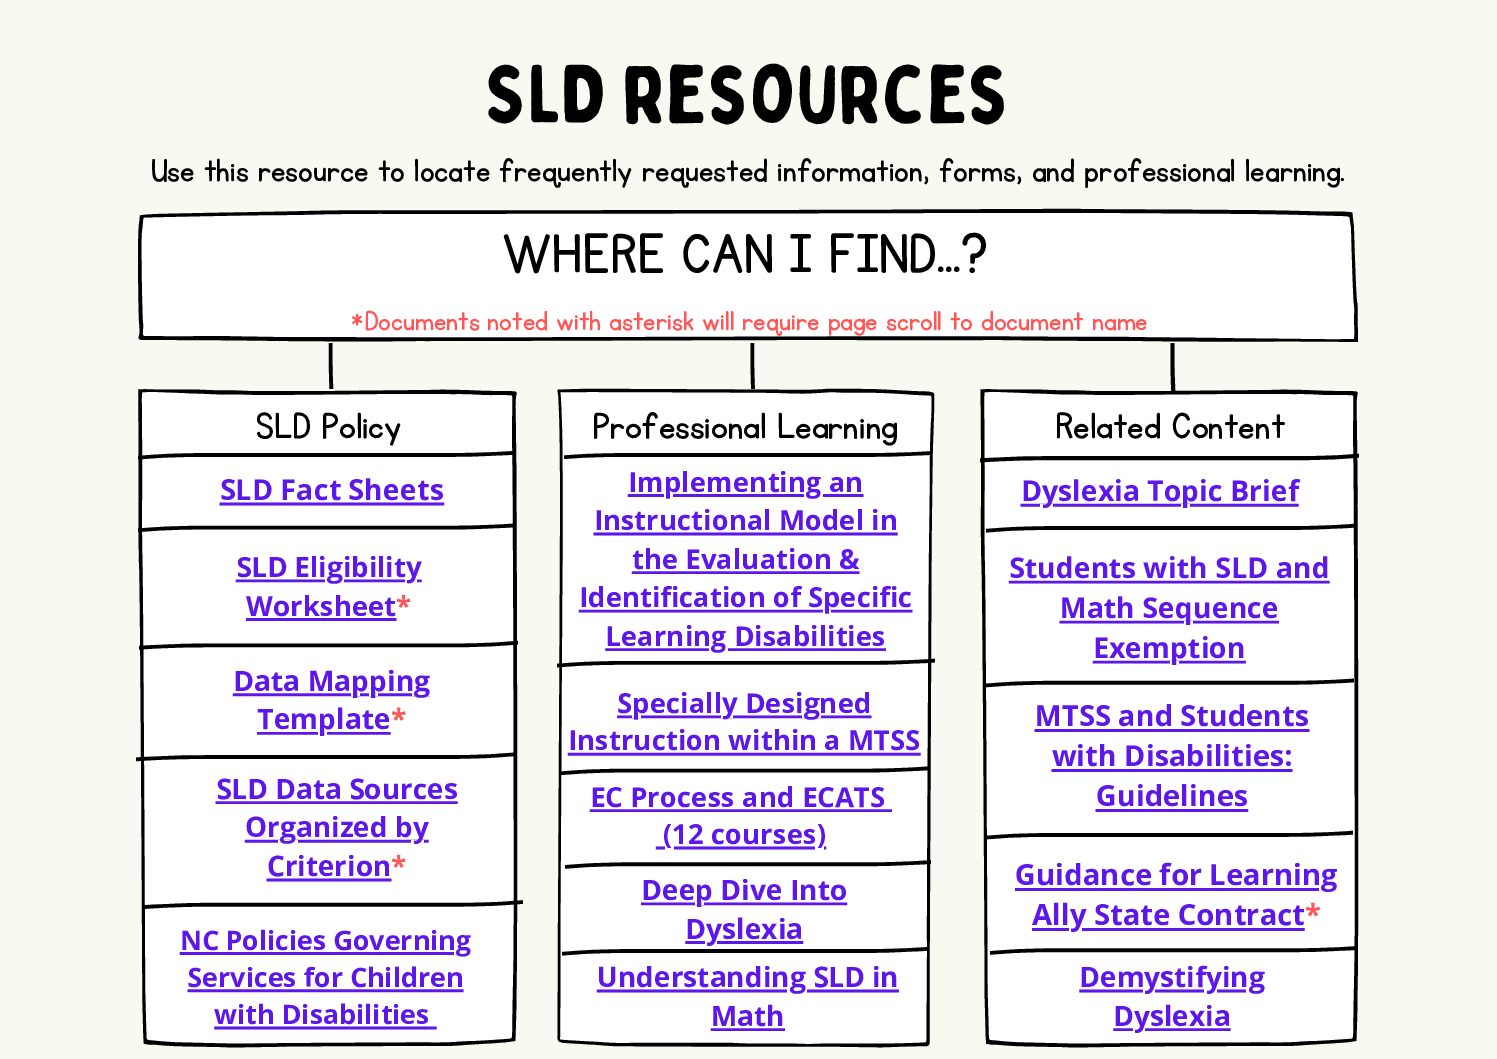 SLD Resources Quick Reference